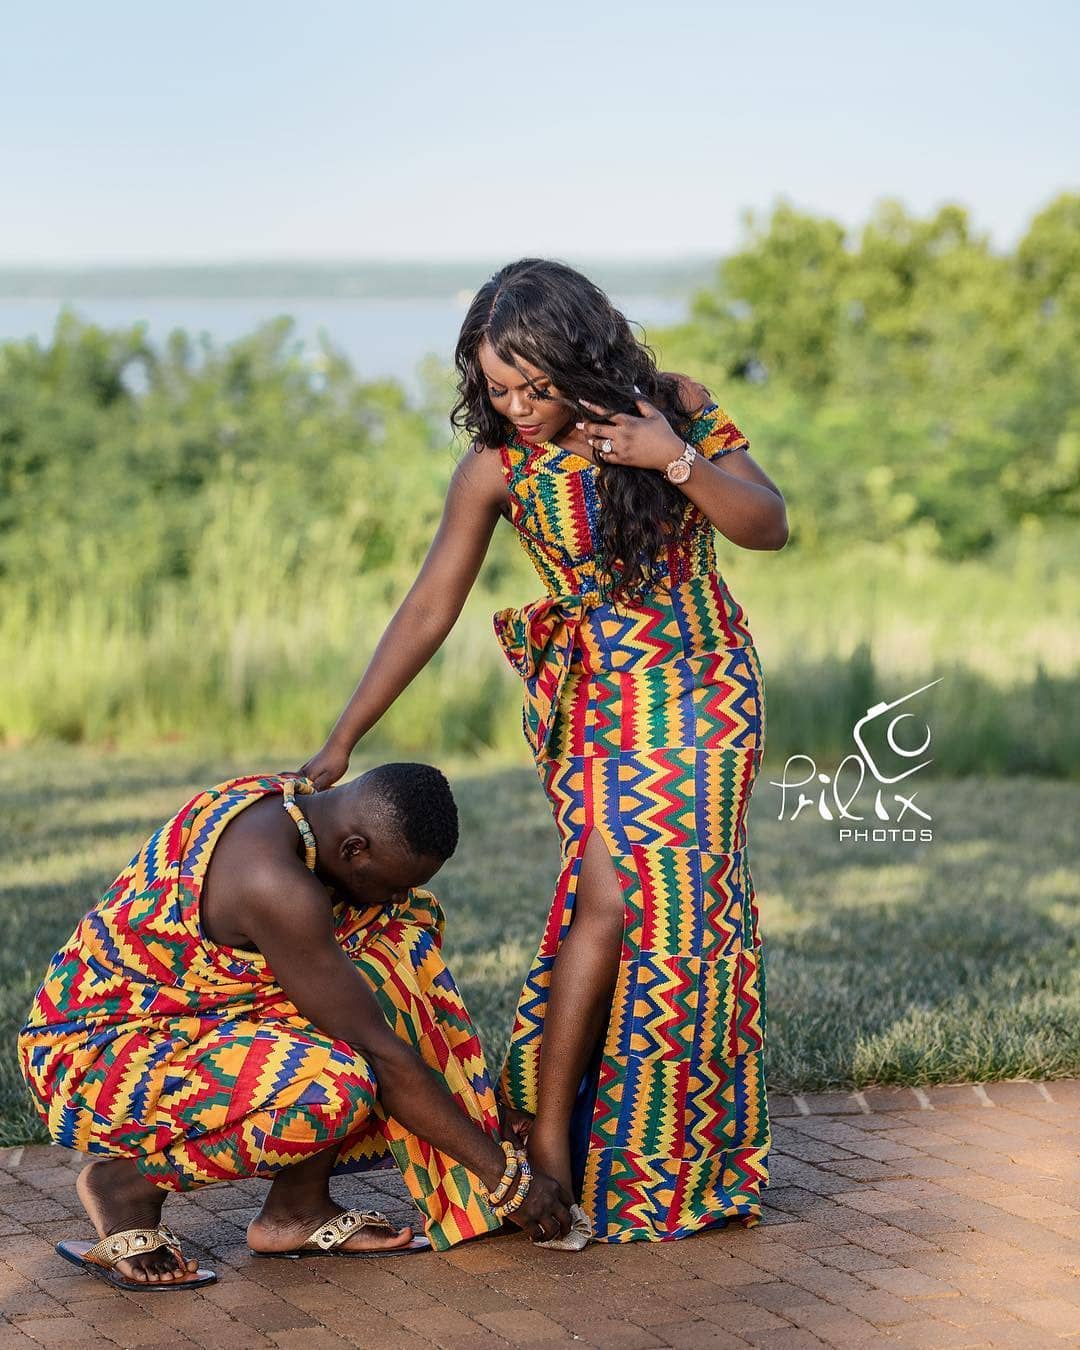 Our Favourite Couple Ankara Styles in 2018